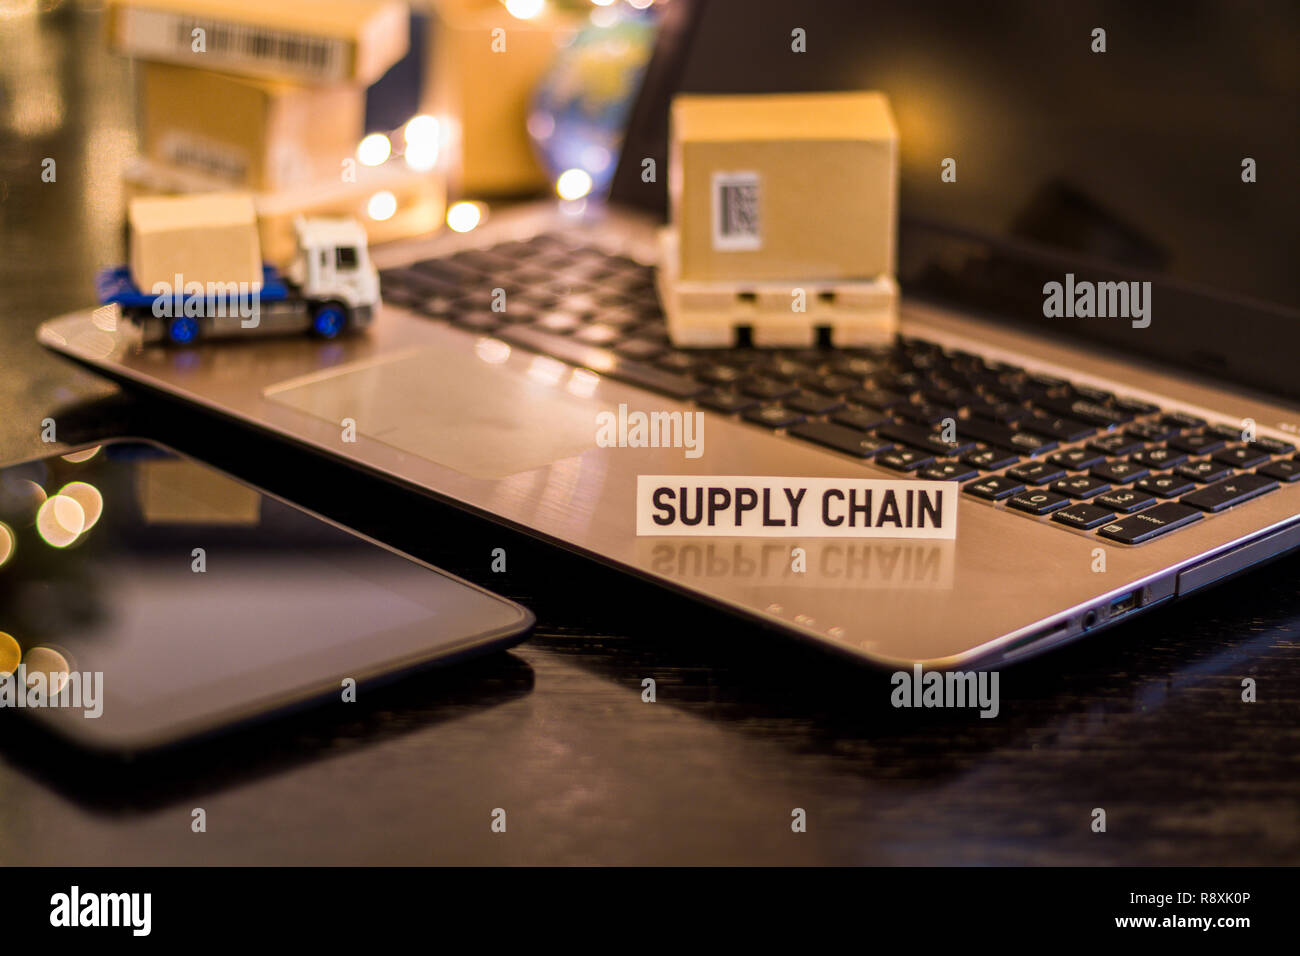 Logistics Supply Chain Challenges - still life logistics business concept with laptop, phone, mini shipping cartons Stock Photo